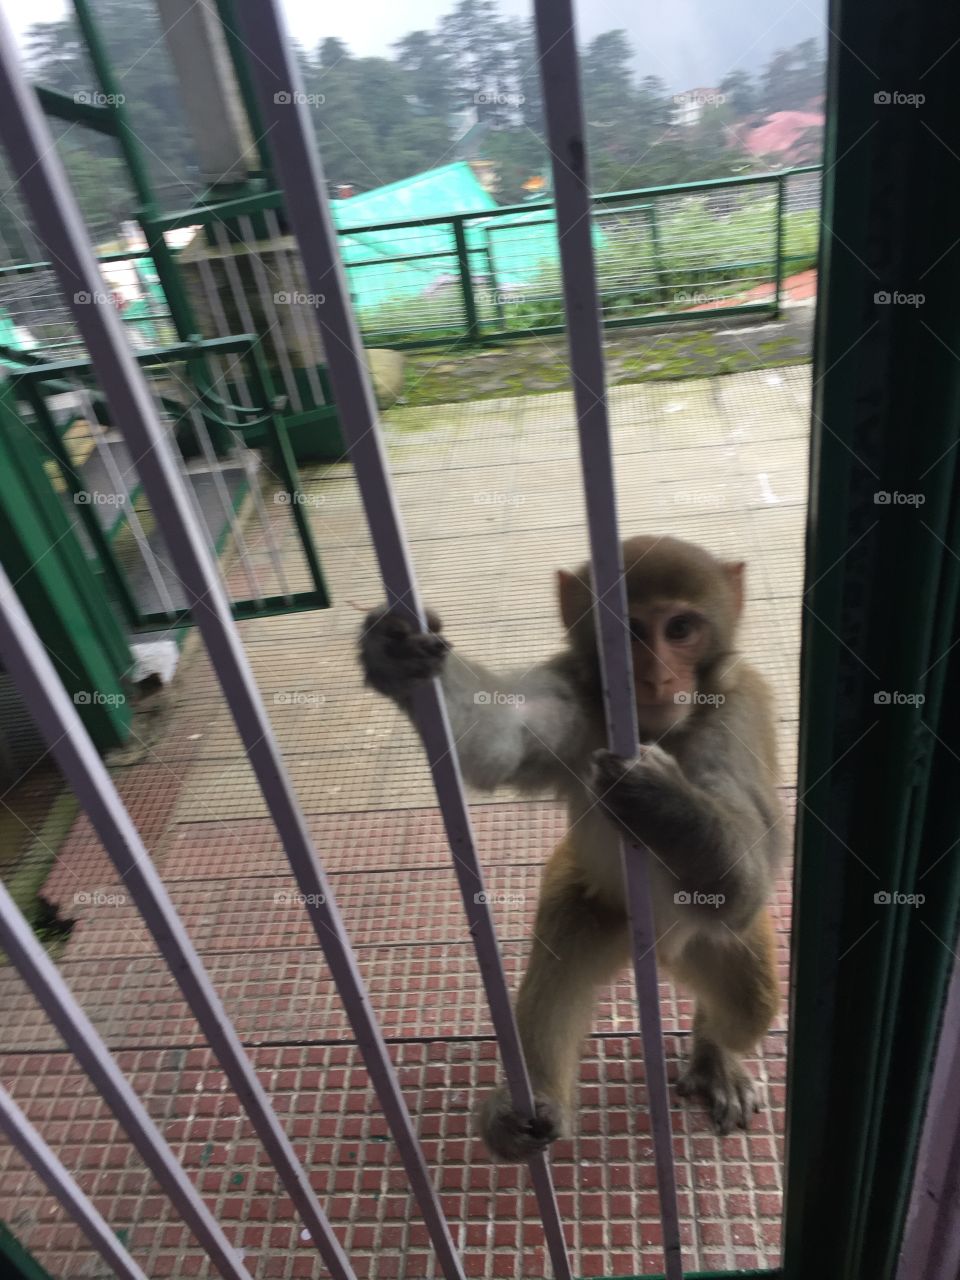 Monkey at the gate